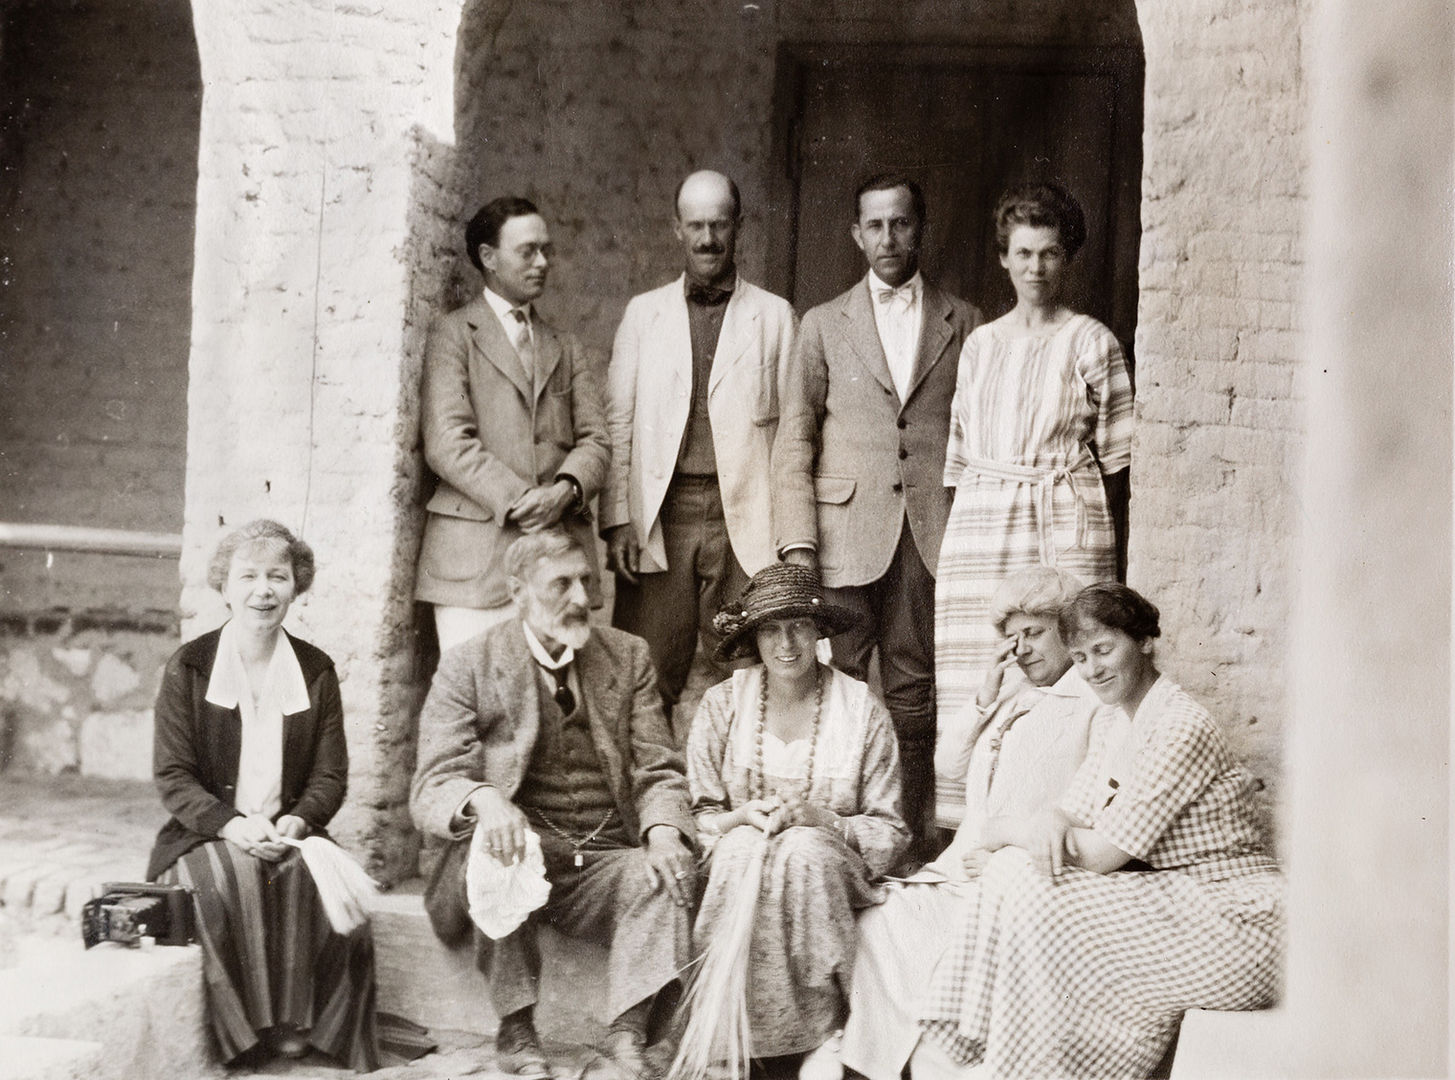 A group of nine people pose in the archway of a house, with three men and one woman in the back and one man and four women in the front. 